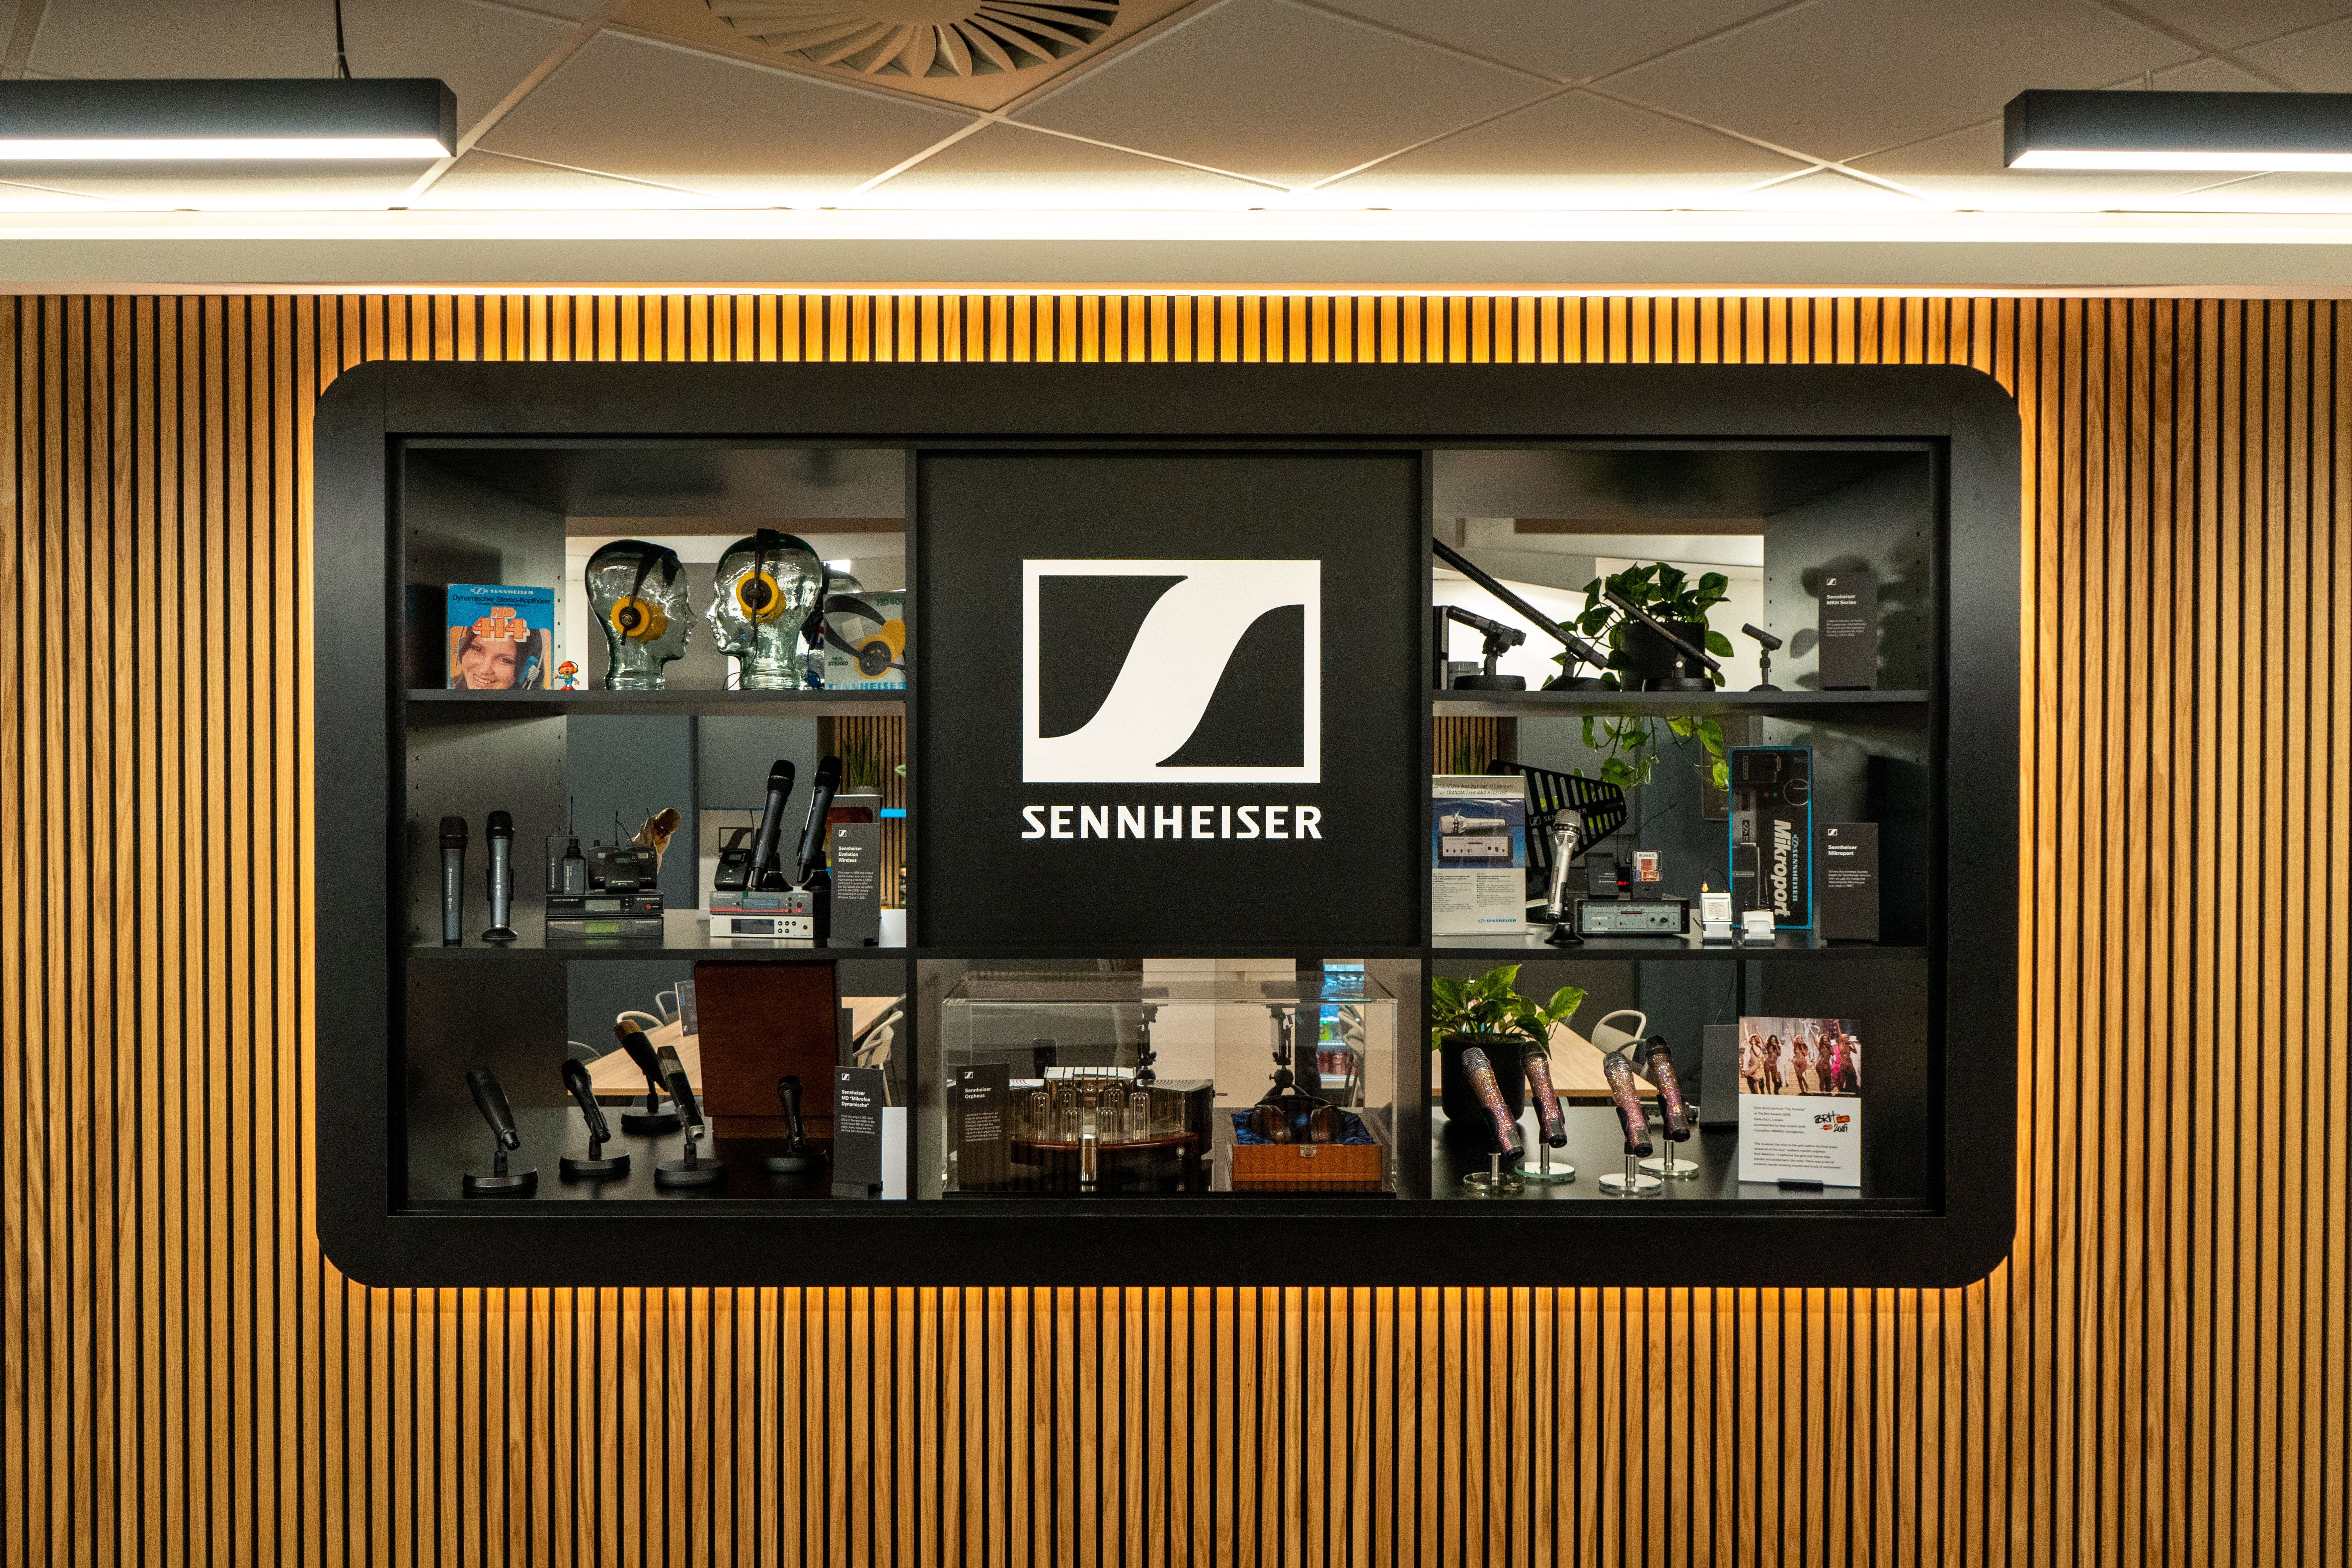 The new Sennheiser UK facility not only caters to the team’s needs, but doubles as a vibrant showcase for the latest advancements in audio technology